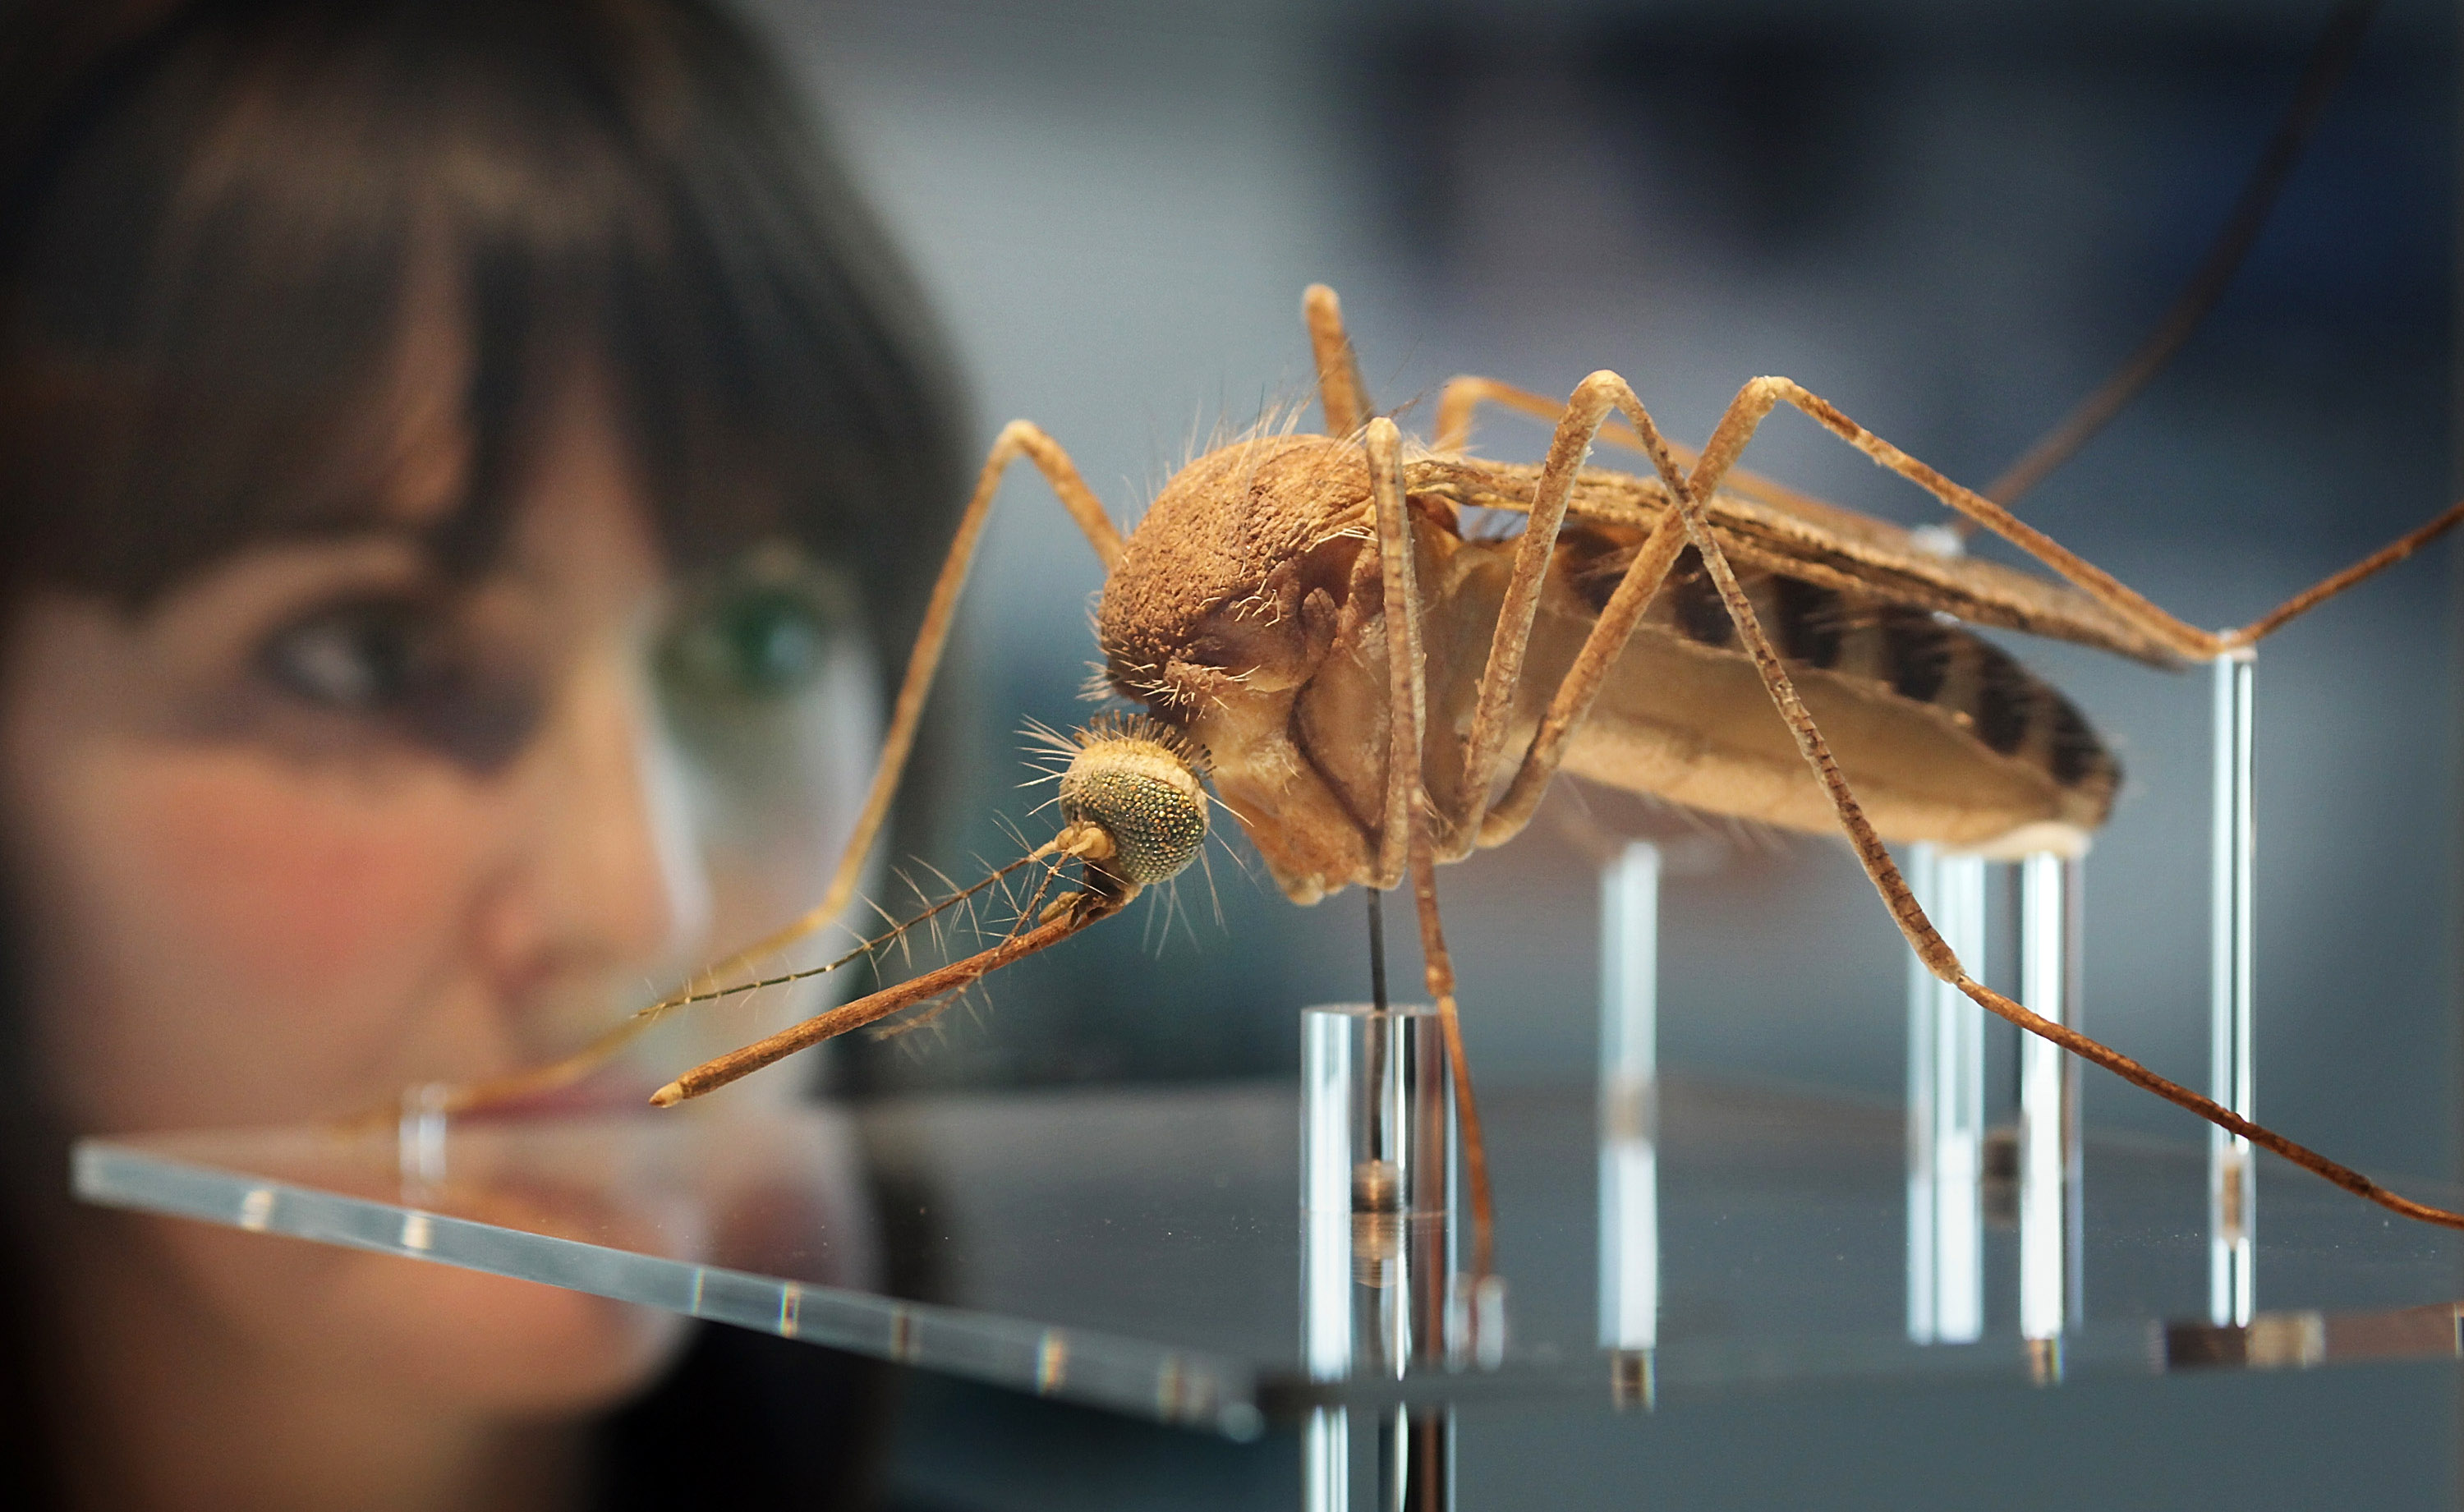 LONDON, ENGLAND - SEPTEMBER 08:  An employee looks at a giant representation of a mosquito at the Darwin Centre, at The Natural History Museum on September 8, 2009 in London, England. The new GBP 78 million centre is a scientific research and collections facility that opens to the public on September 15, 2009. 200 scientists work in the new building that also contains the eight story 'Cocoon', which at 65 metres long is Europe's largest sprayed concrete curved structure containing the museum's collection of 17 million insect and three million plant specimens.  (Photo by Peter Macdiarmid/Getty Images)